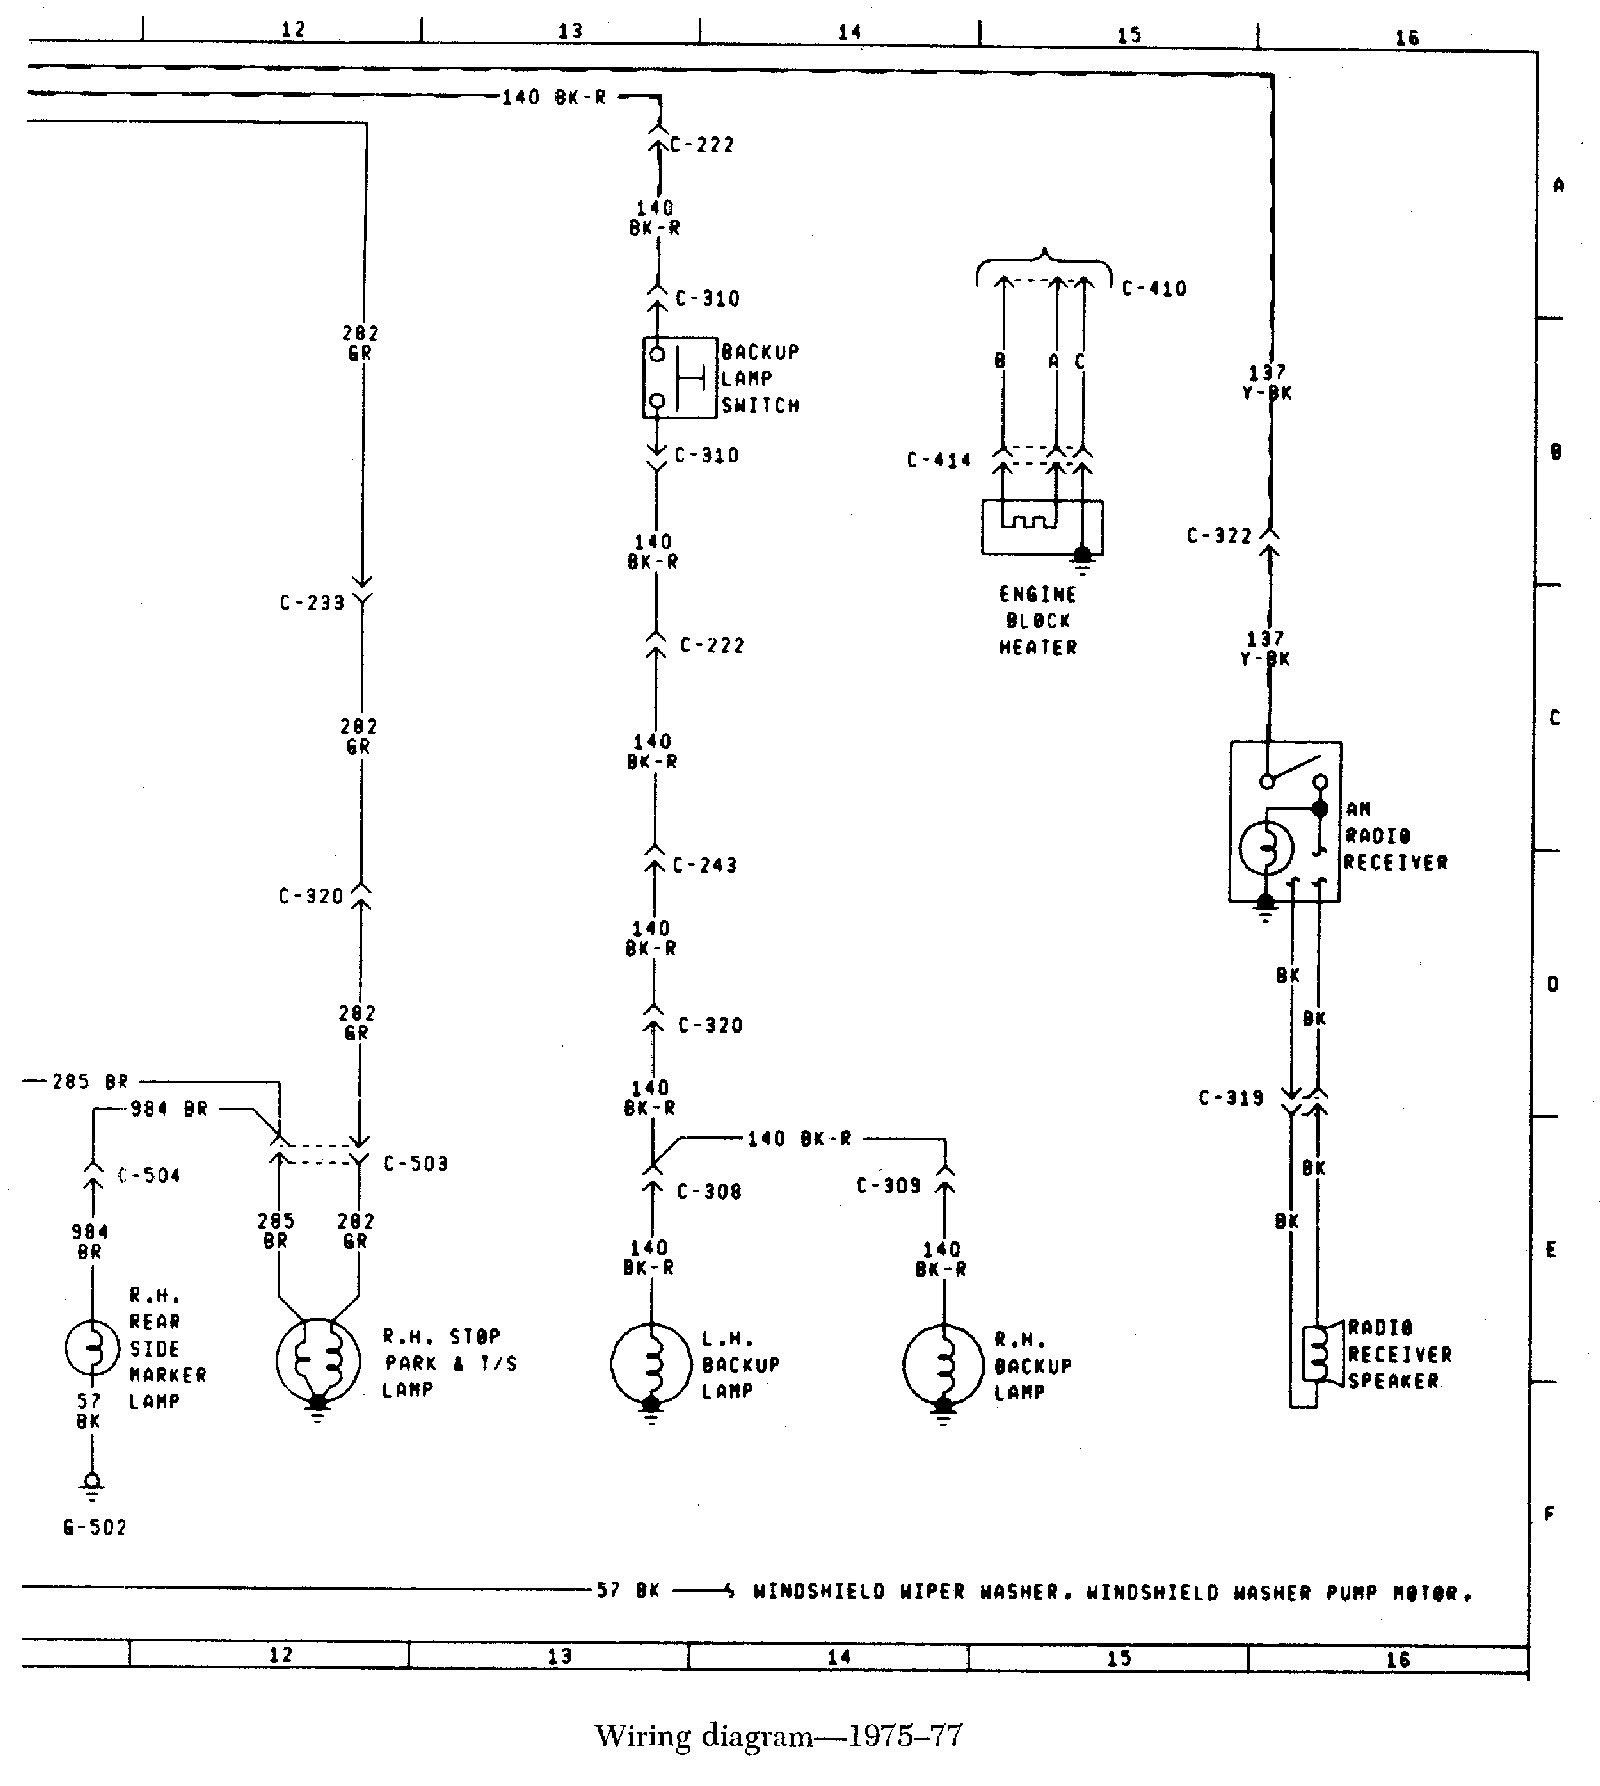 3 Position Selector Switch Wiring Diagram Fresh Wiring Diagram for A 6 Position Rotary Switch Archives